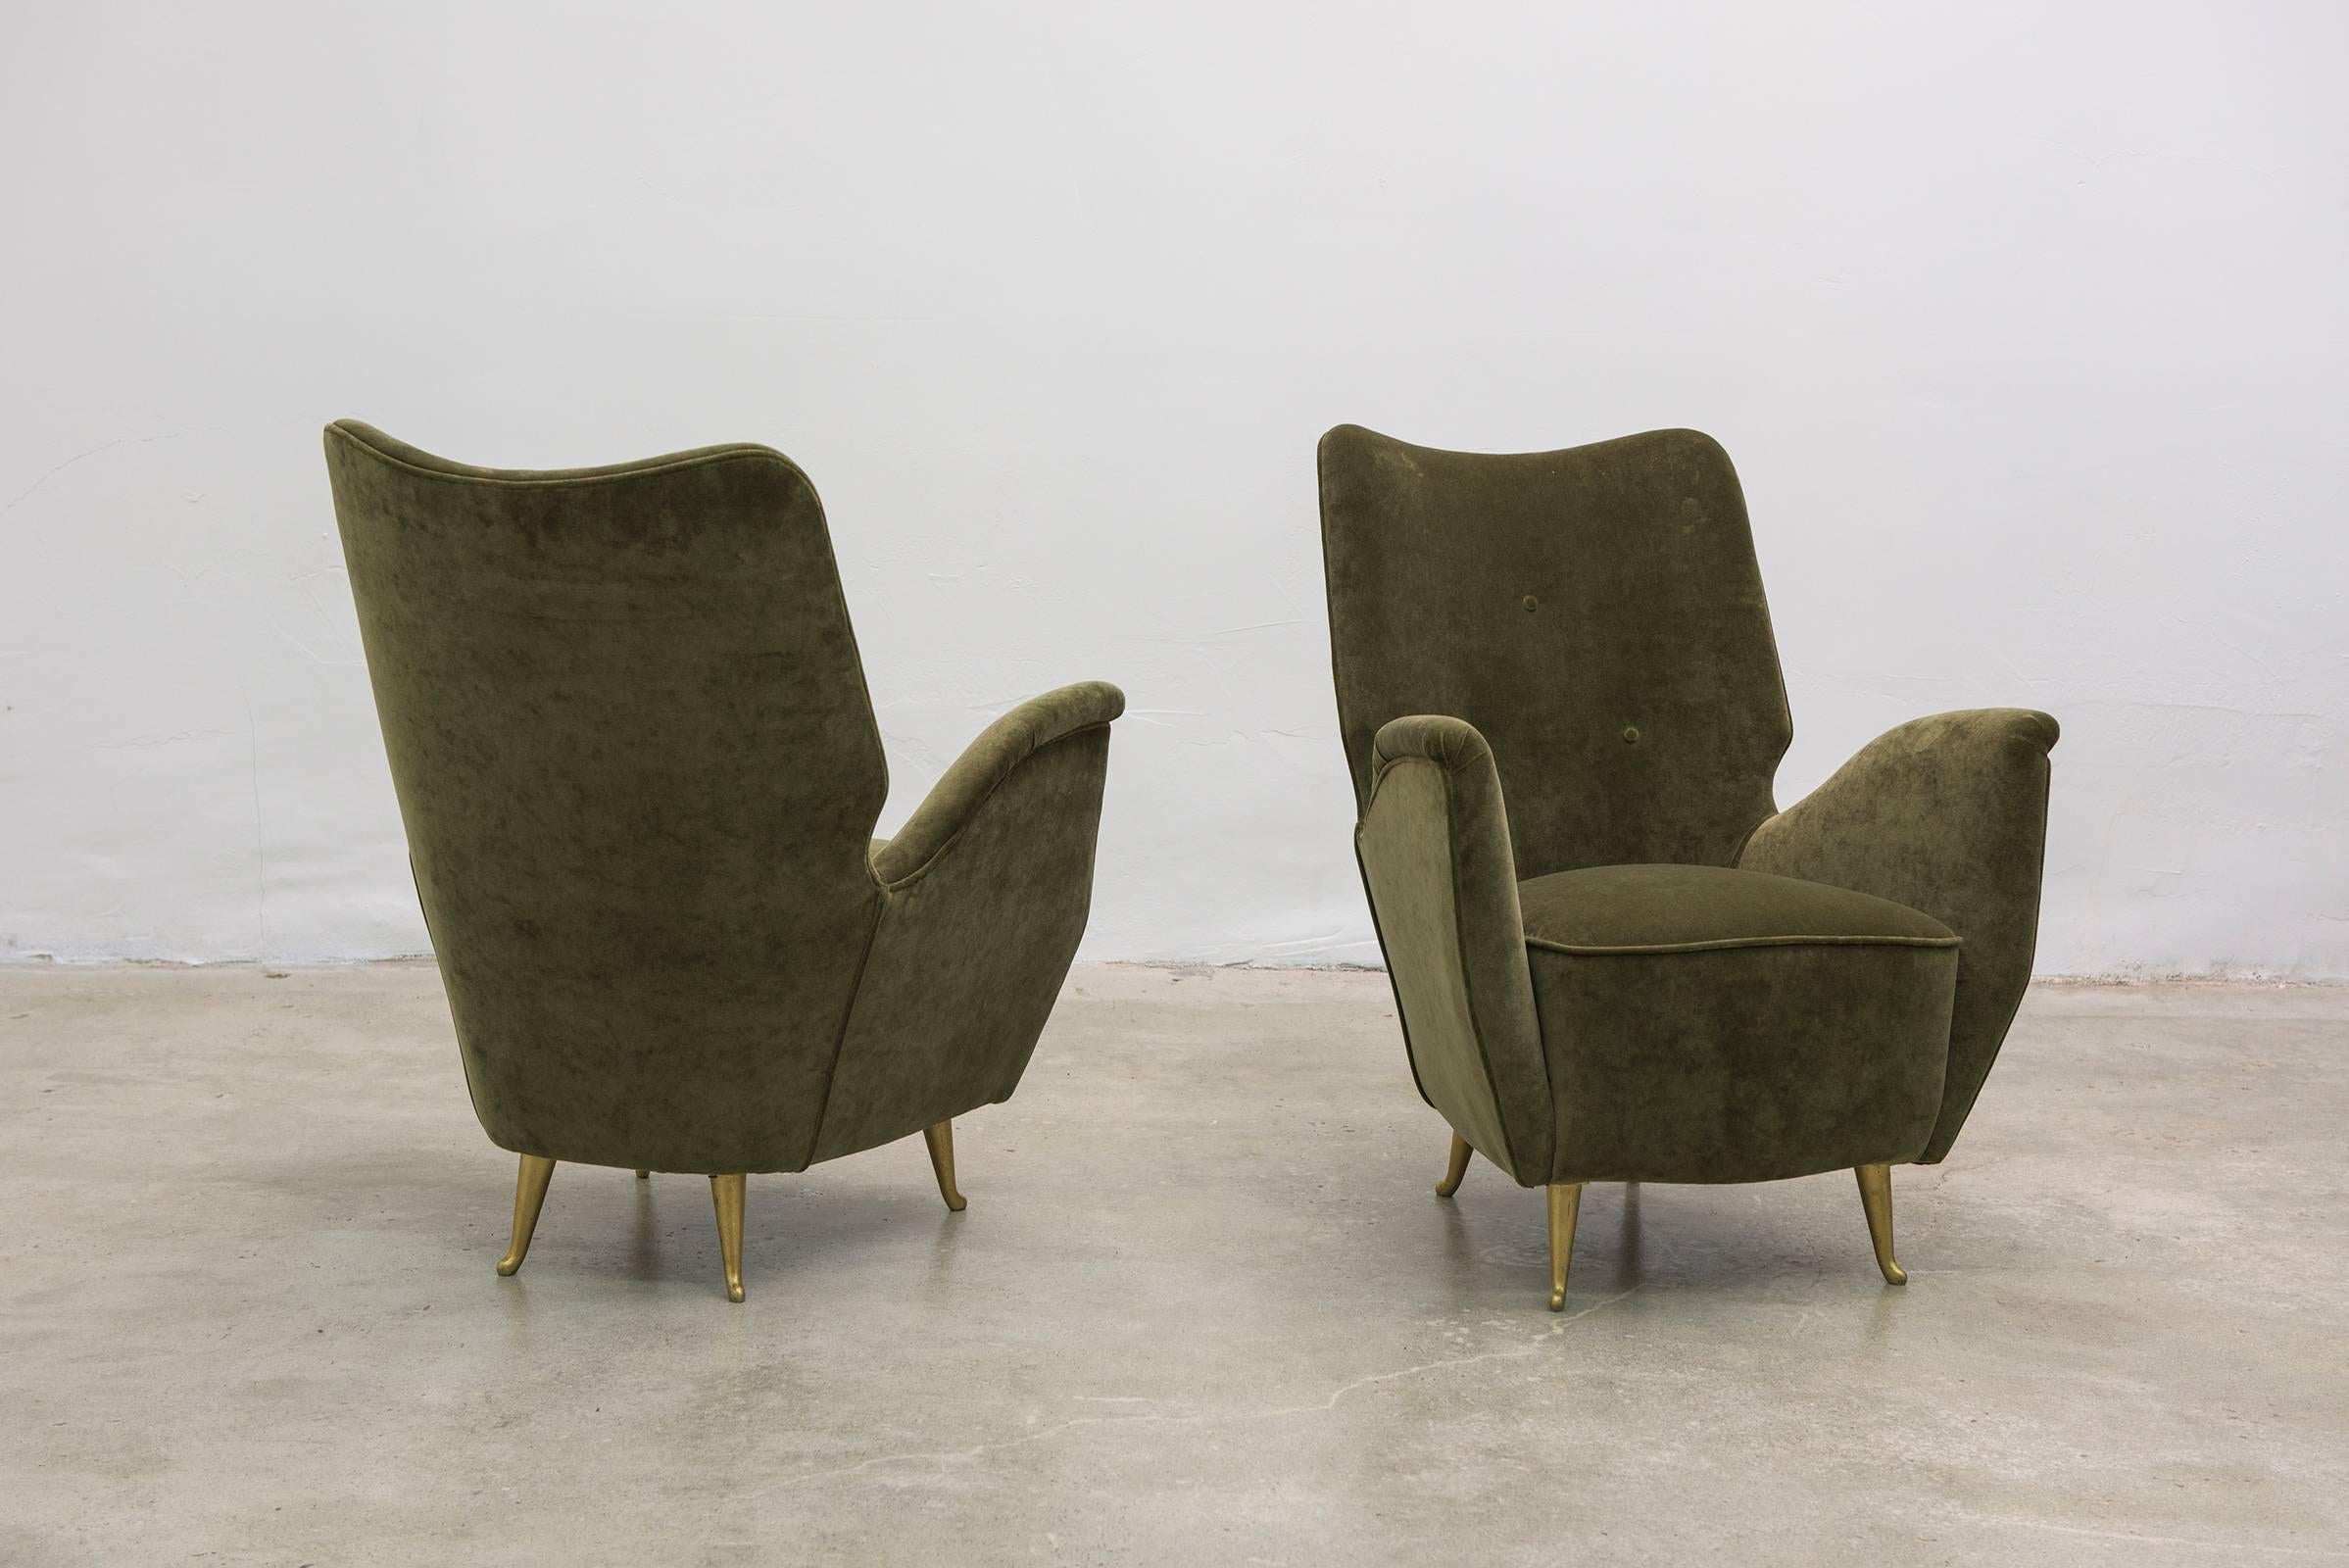 Vintage Pair of Italian Modern Salon Armchairs by Arredamenti ISA, 1940s. Gorgeous pair of petite armchairs by Arredamenti ISA, Bergamo, Italy with sculpted back and slightly winged arms. Reupholstered in sage green velvet with gilt metal legs.